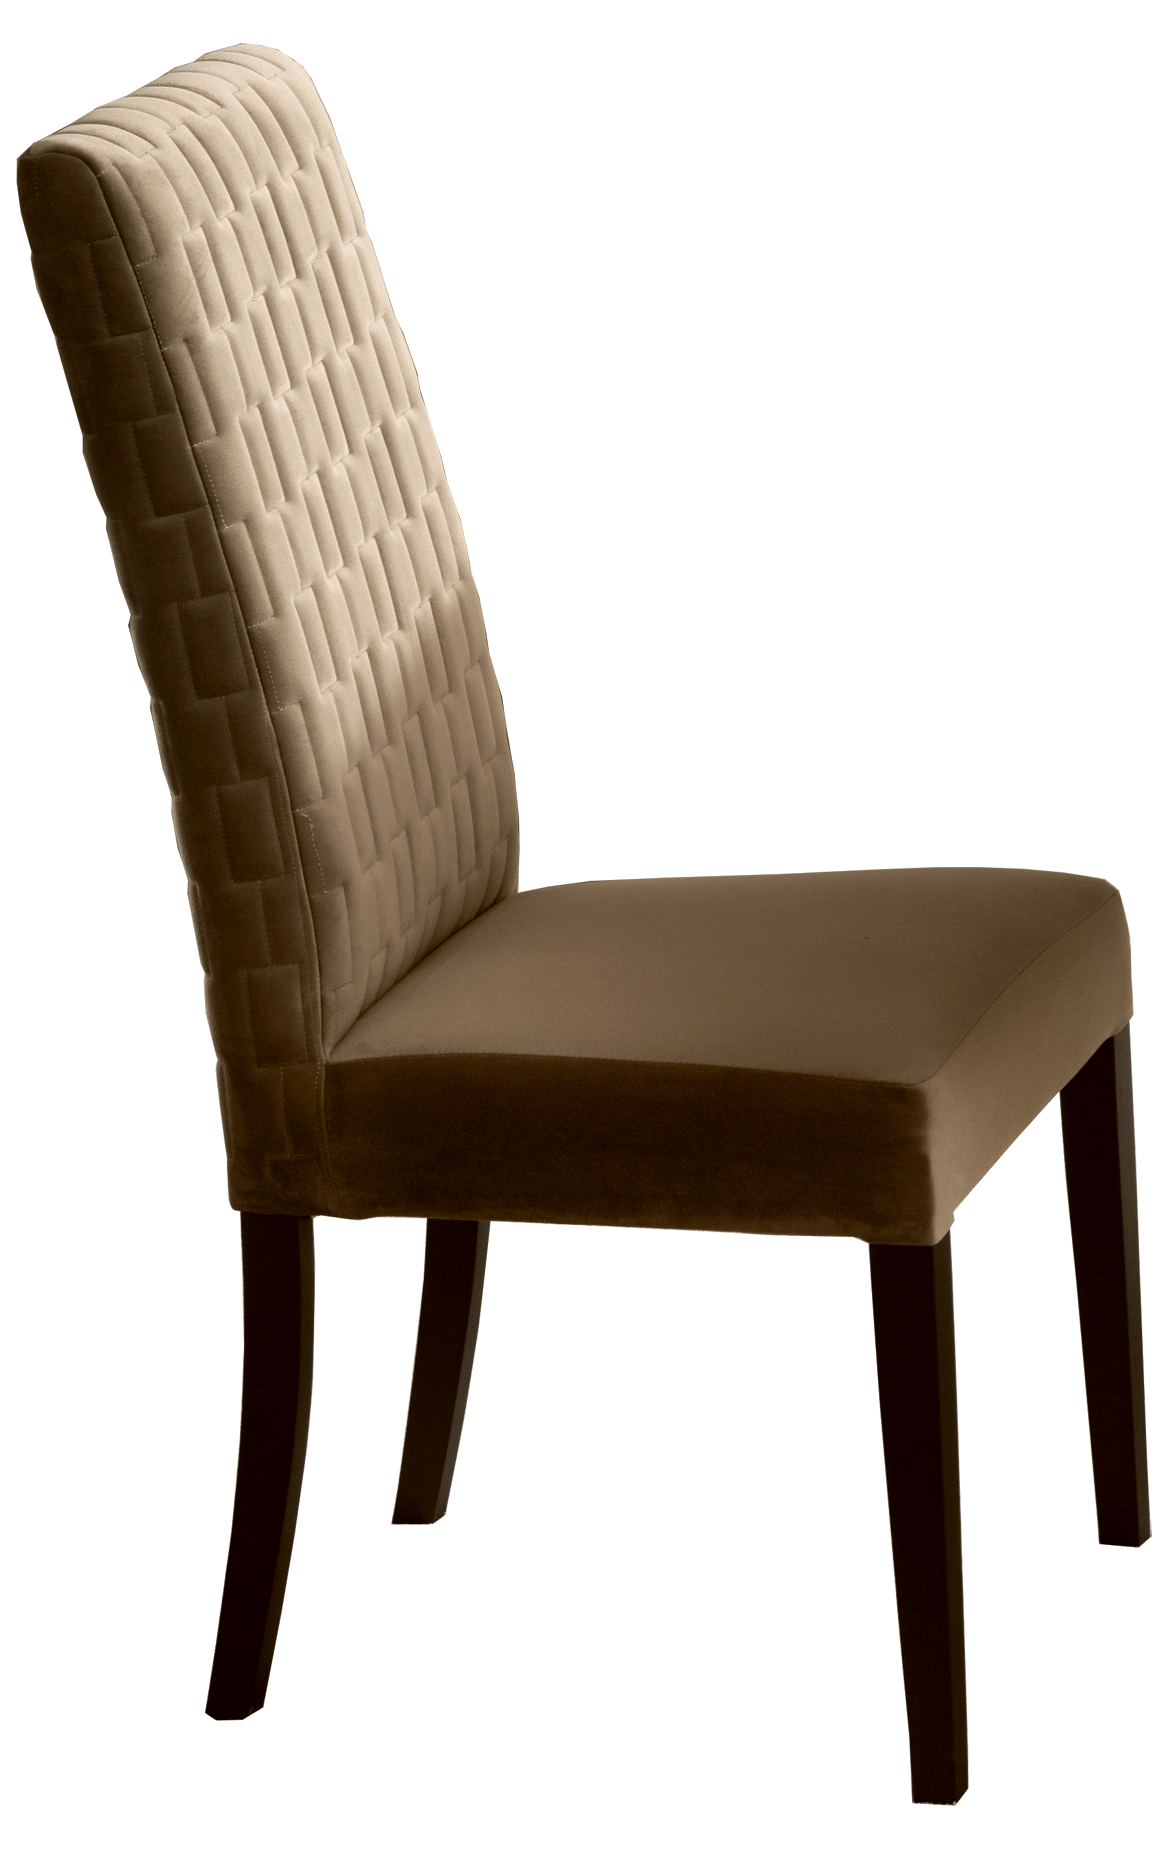 Brands Motif, Spain Poesia Dining Chair by Arredoclassic